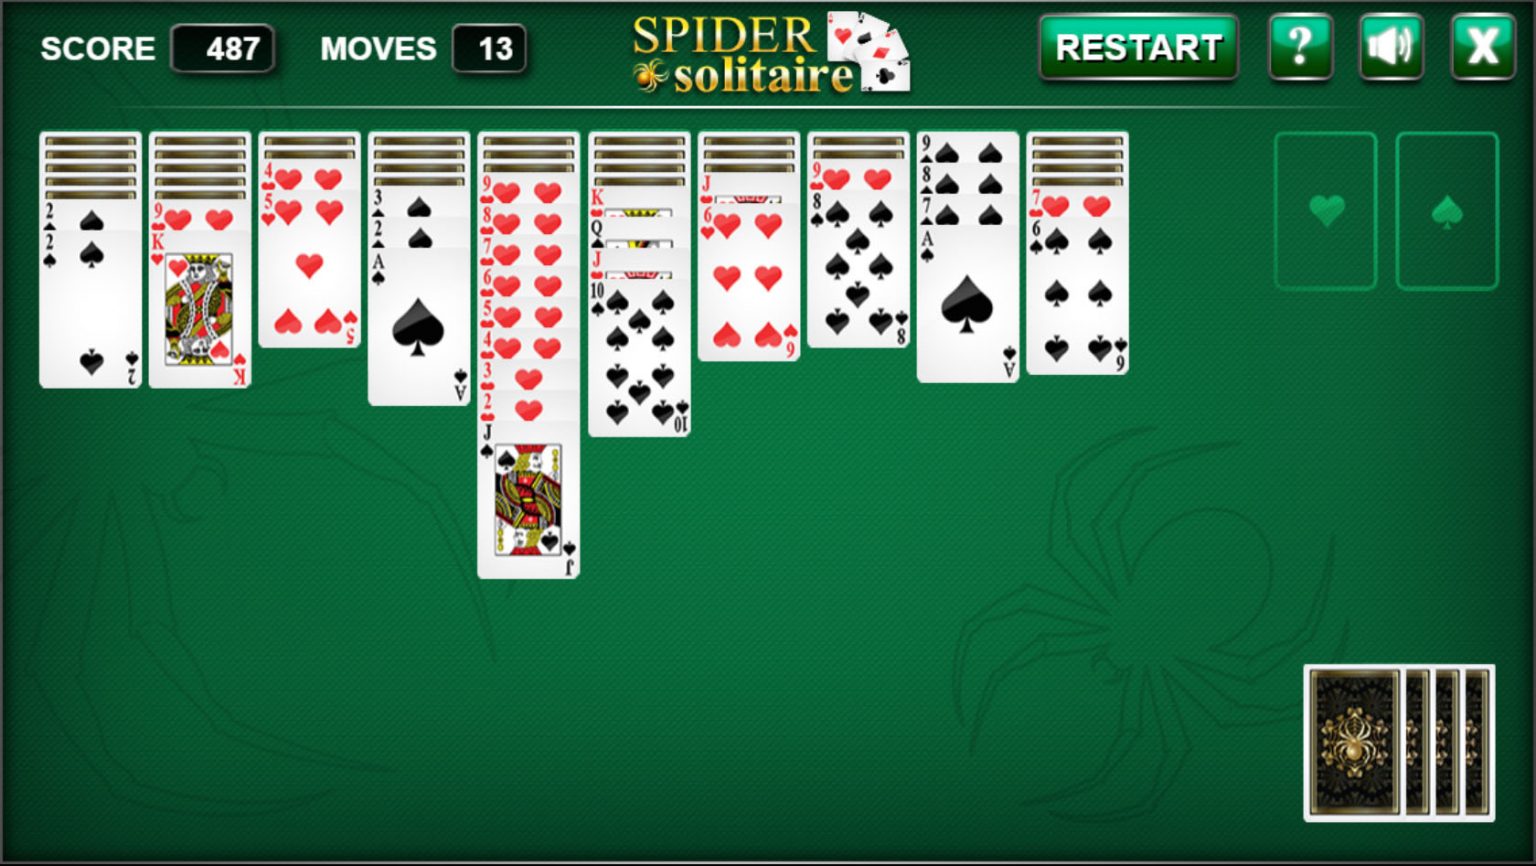 solitaire spider online game to play